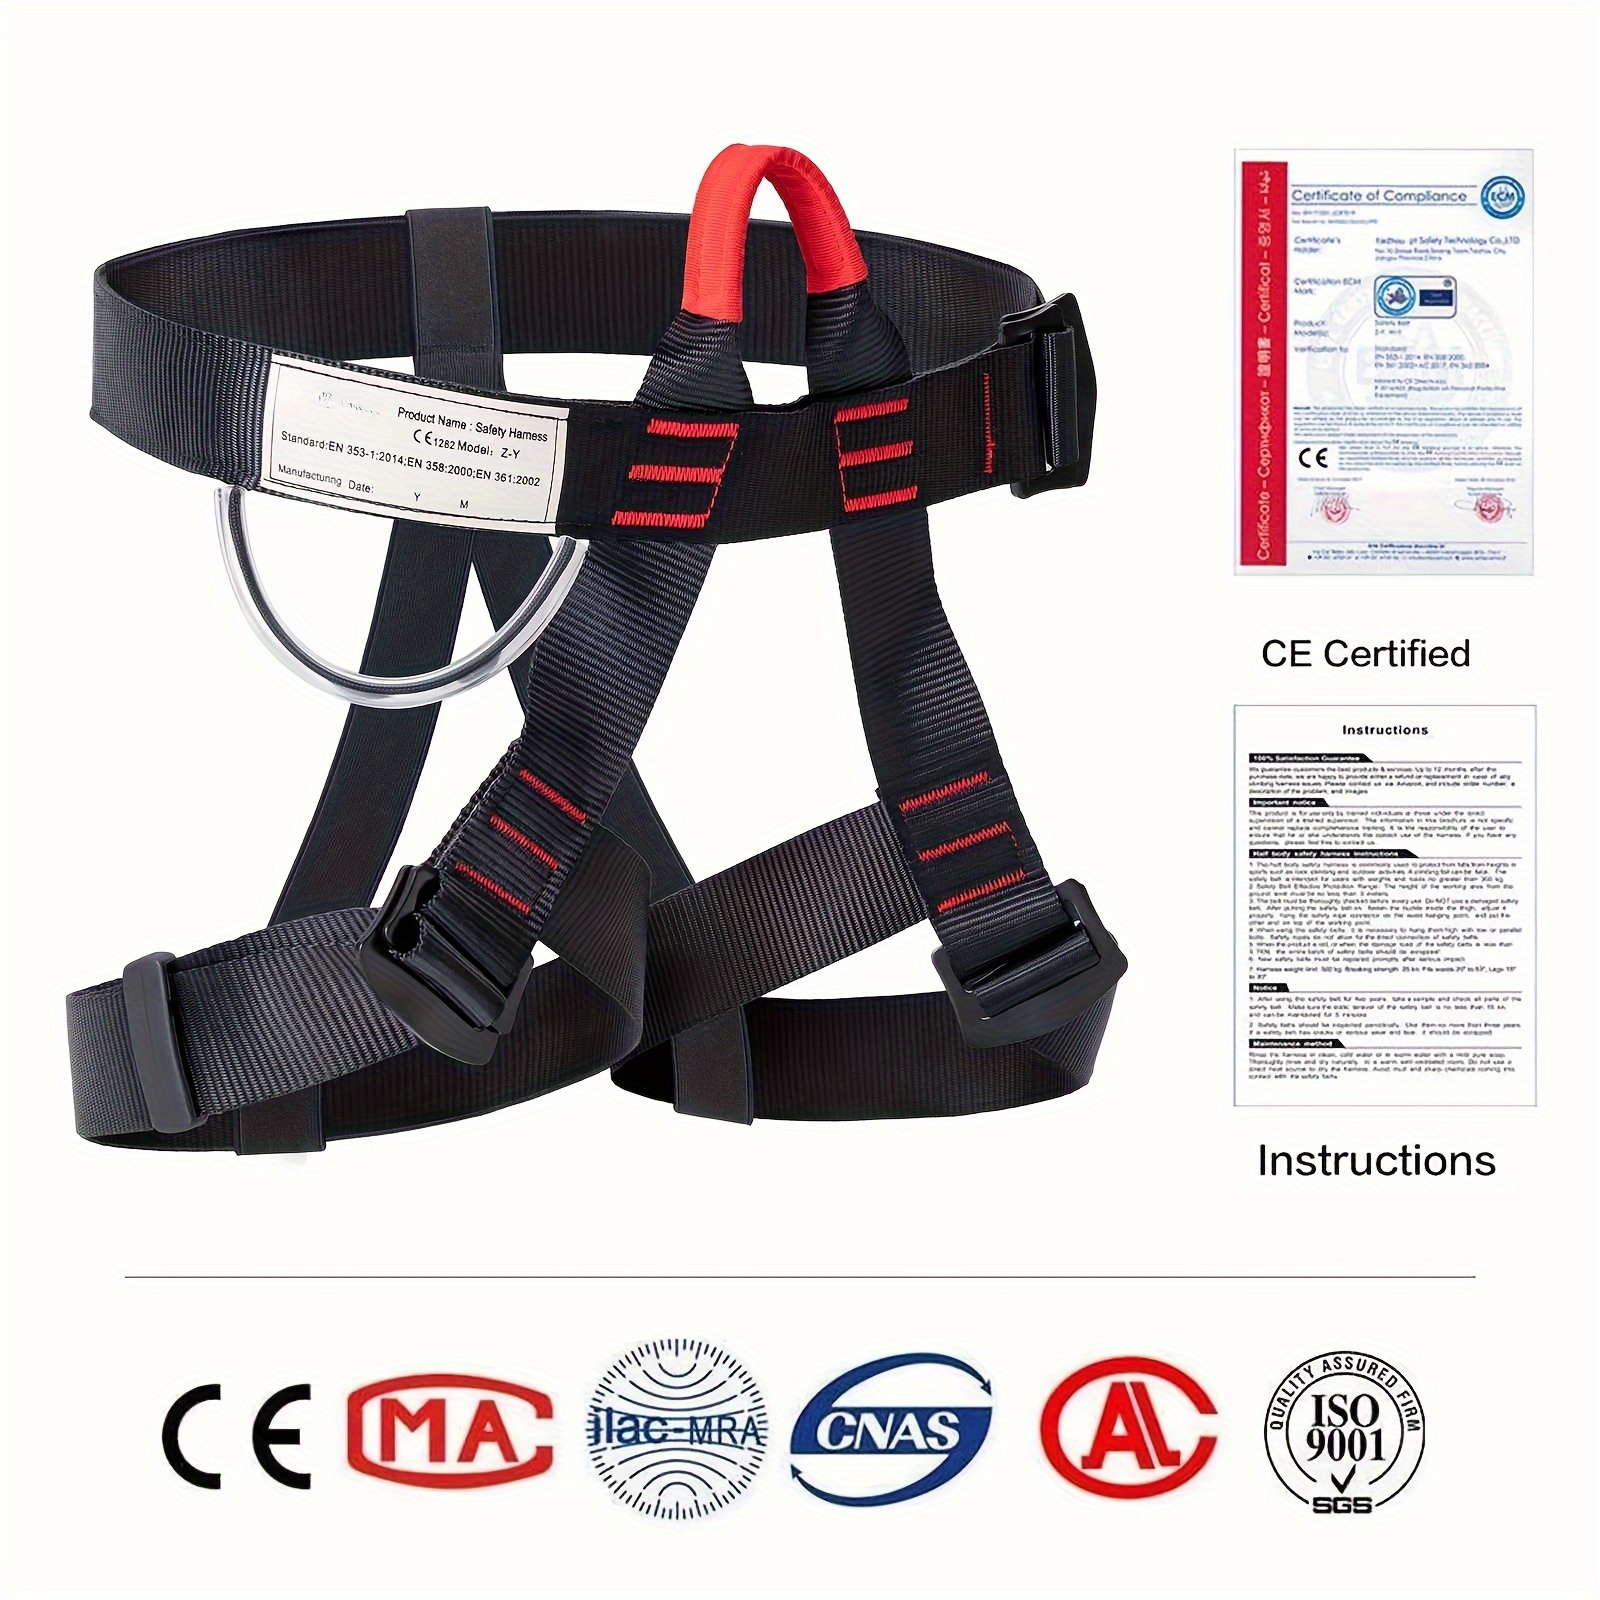  Ttechouter Adjustable Thickness Climbing Harness Half Body  Harnesses for Fire Rescuing Caving Rock Climbing Rappelling Tree Protect  Waist Safety Belts : Sports & Outdoors